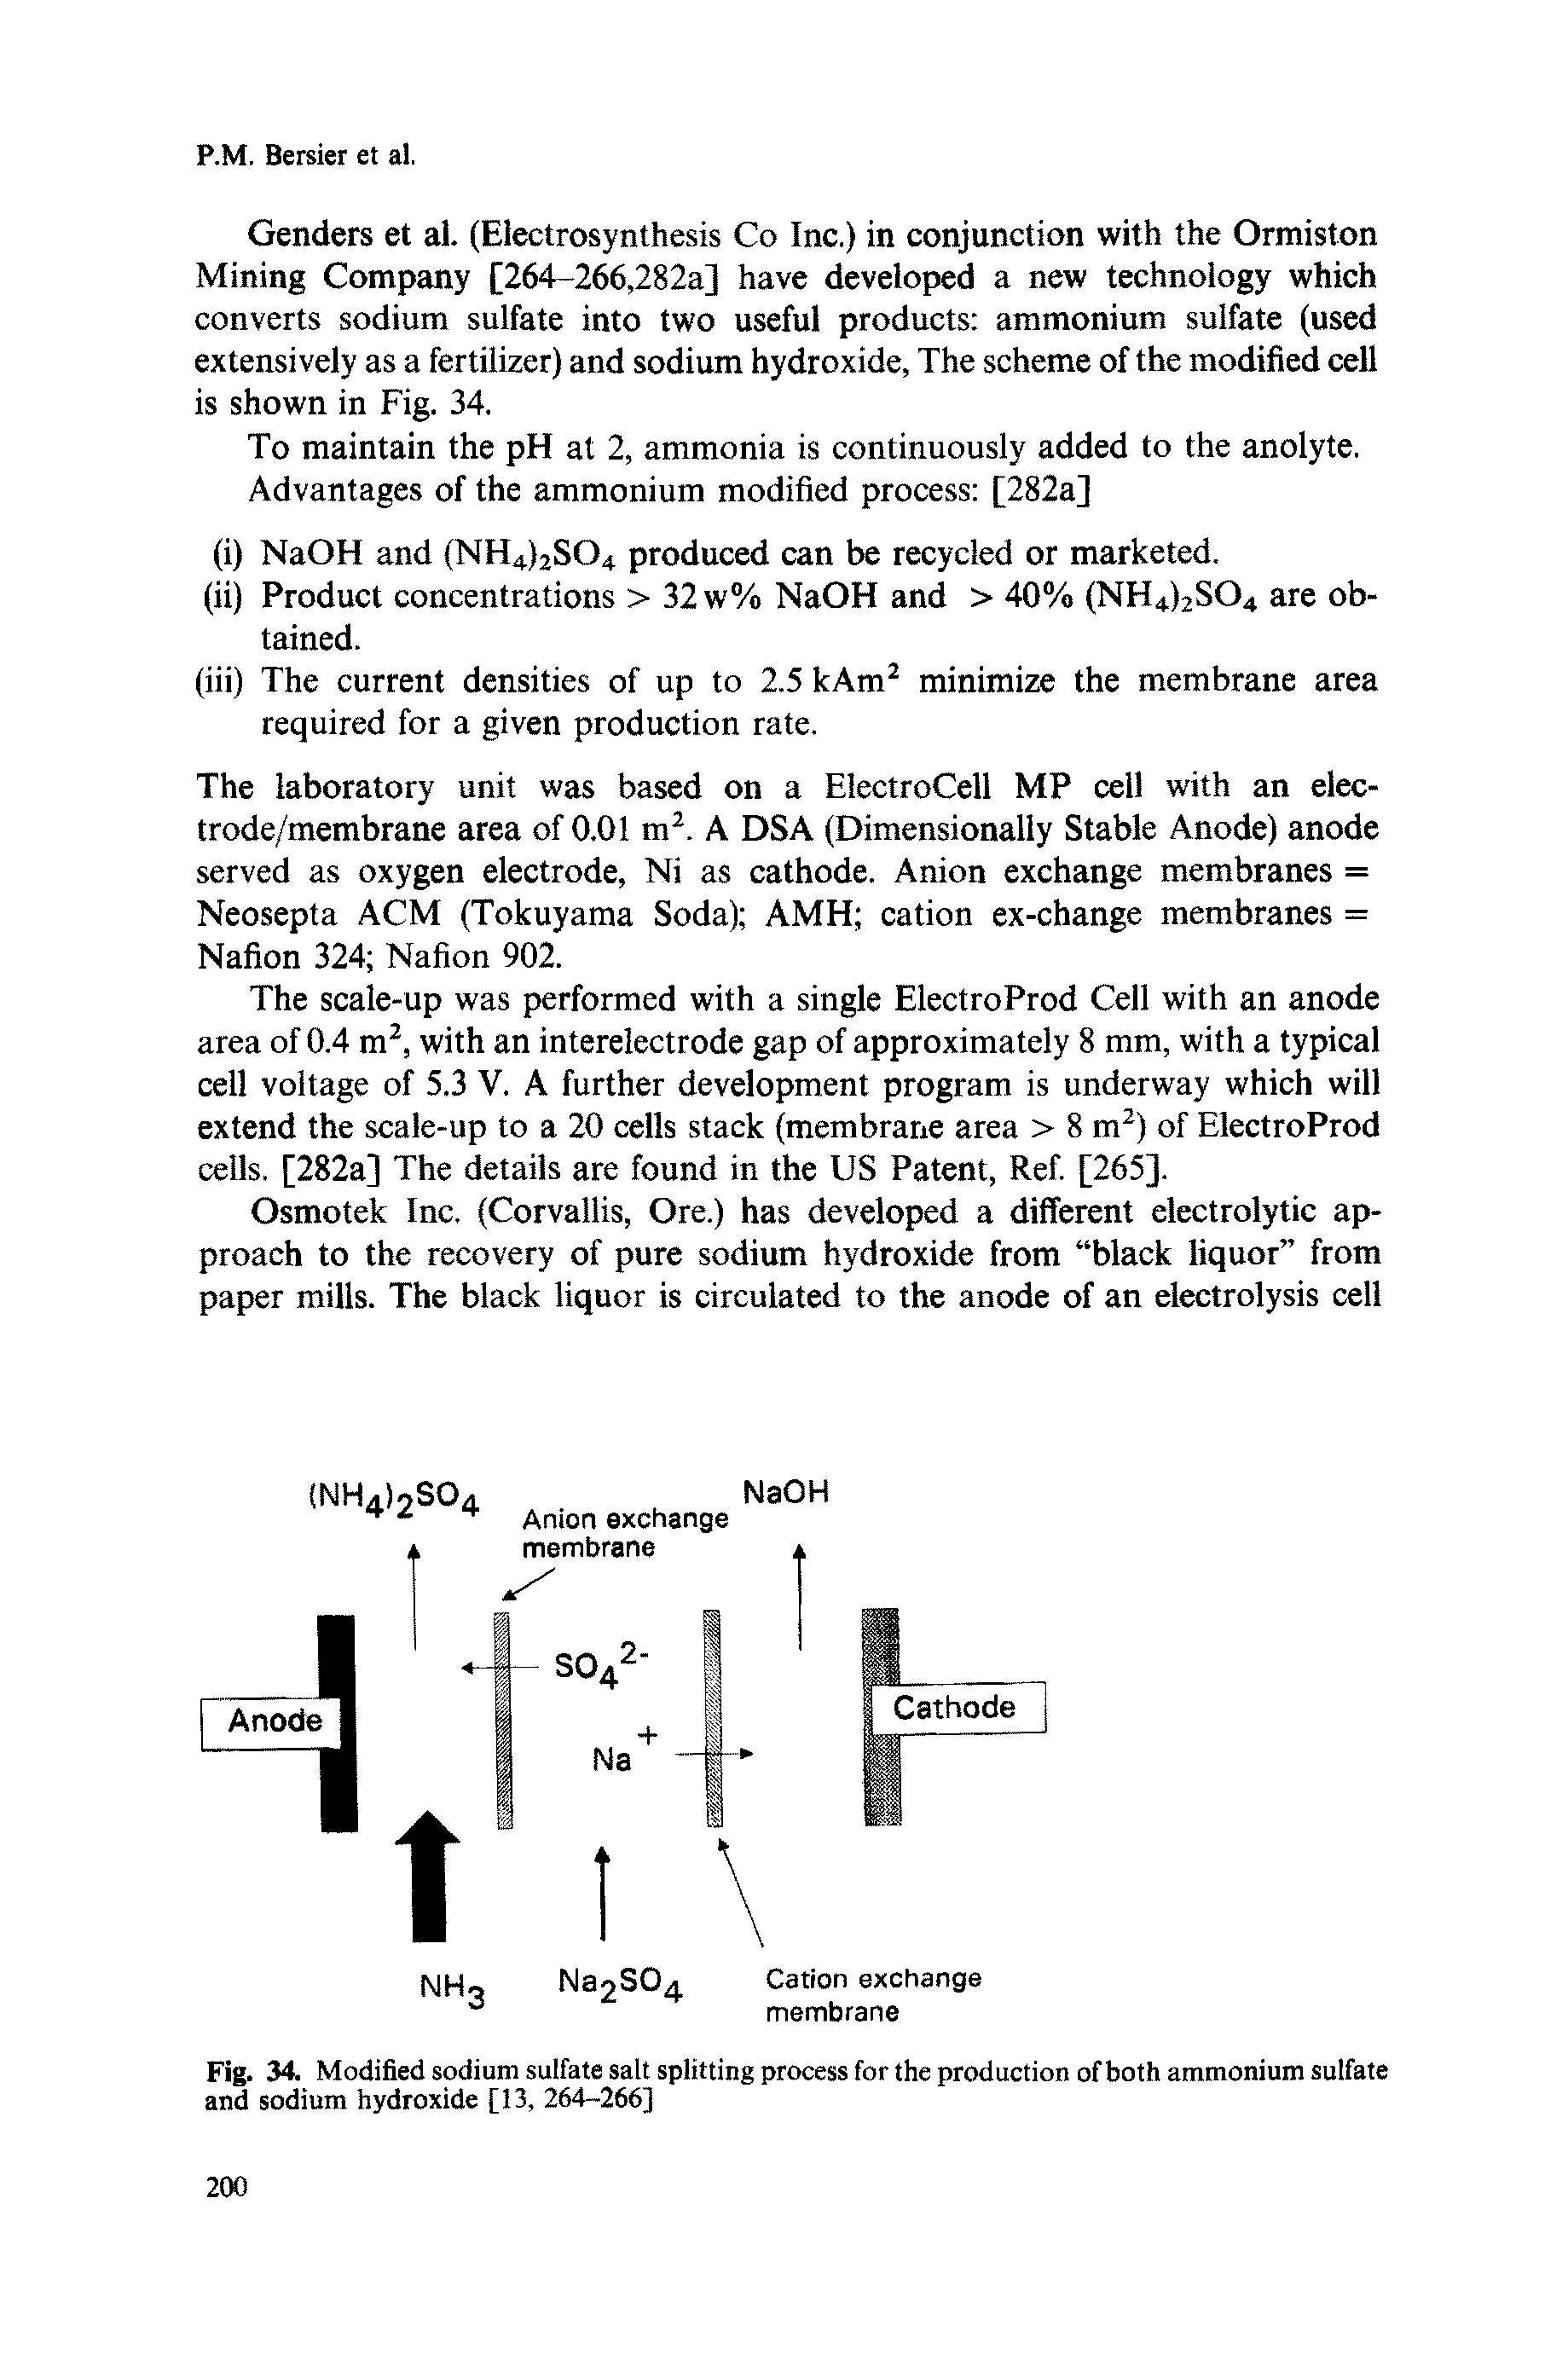 Fig. 34. Modified sodium sulfate salt splitting process for the production of both ammonium sulfate and sodium hydroxide [13, 264-266]...